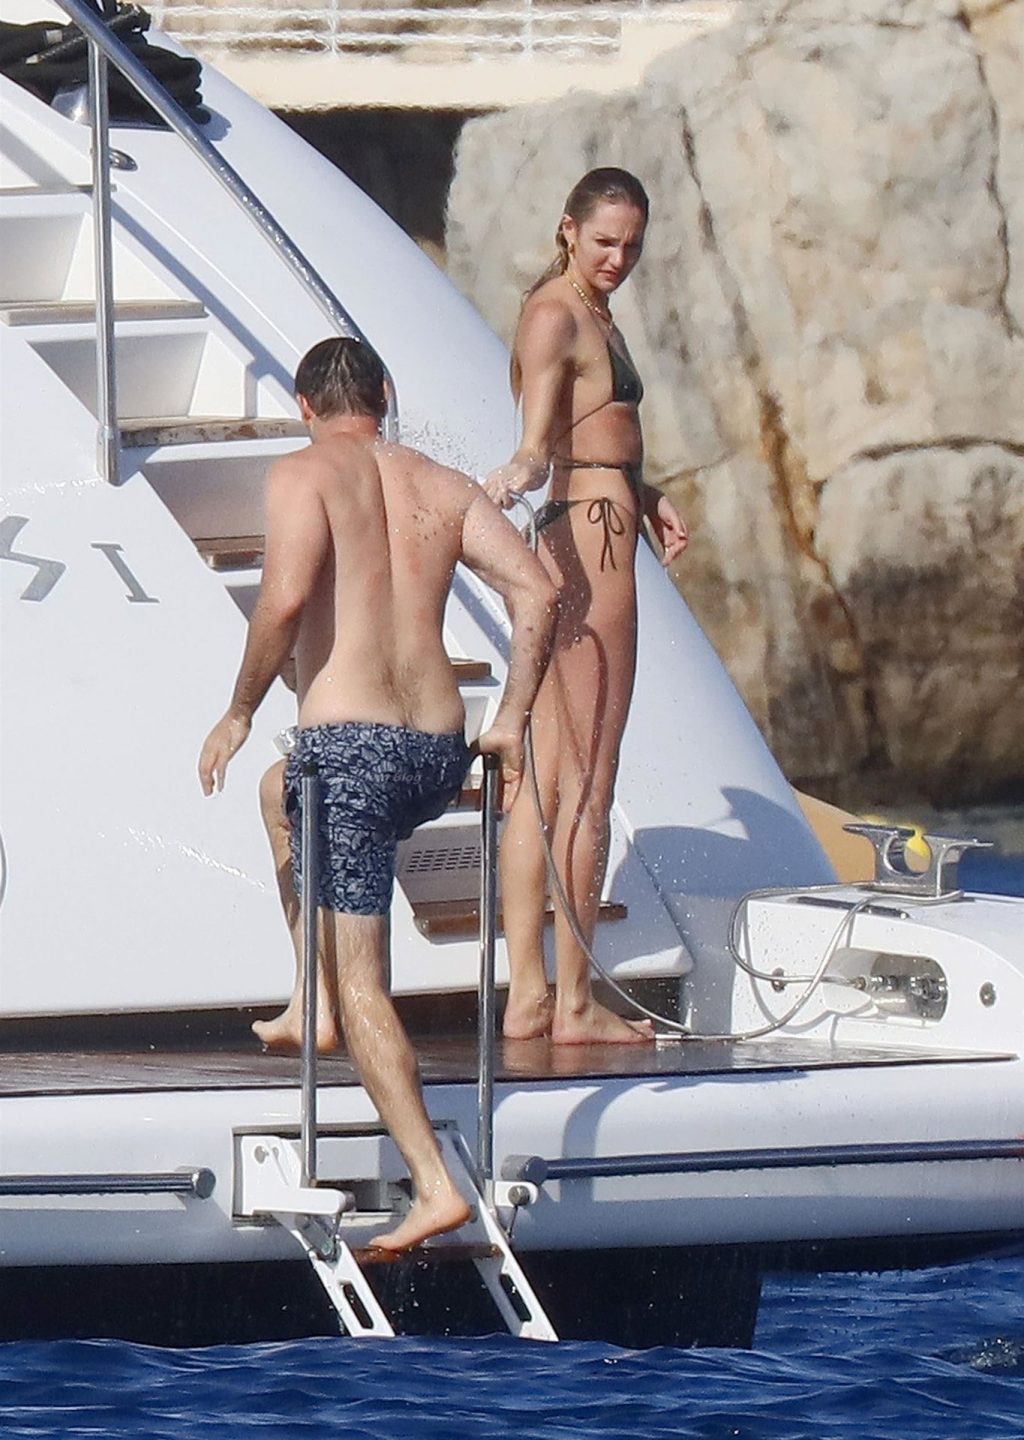 Candice Swanepoel and Her New Boyfriend are Seen on a Yacht on the French Riviera (44 Photos)